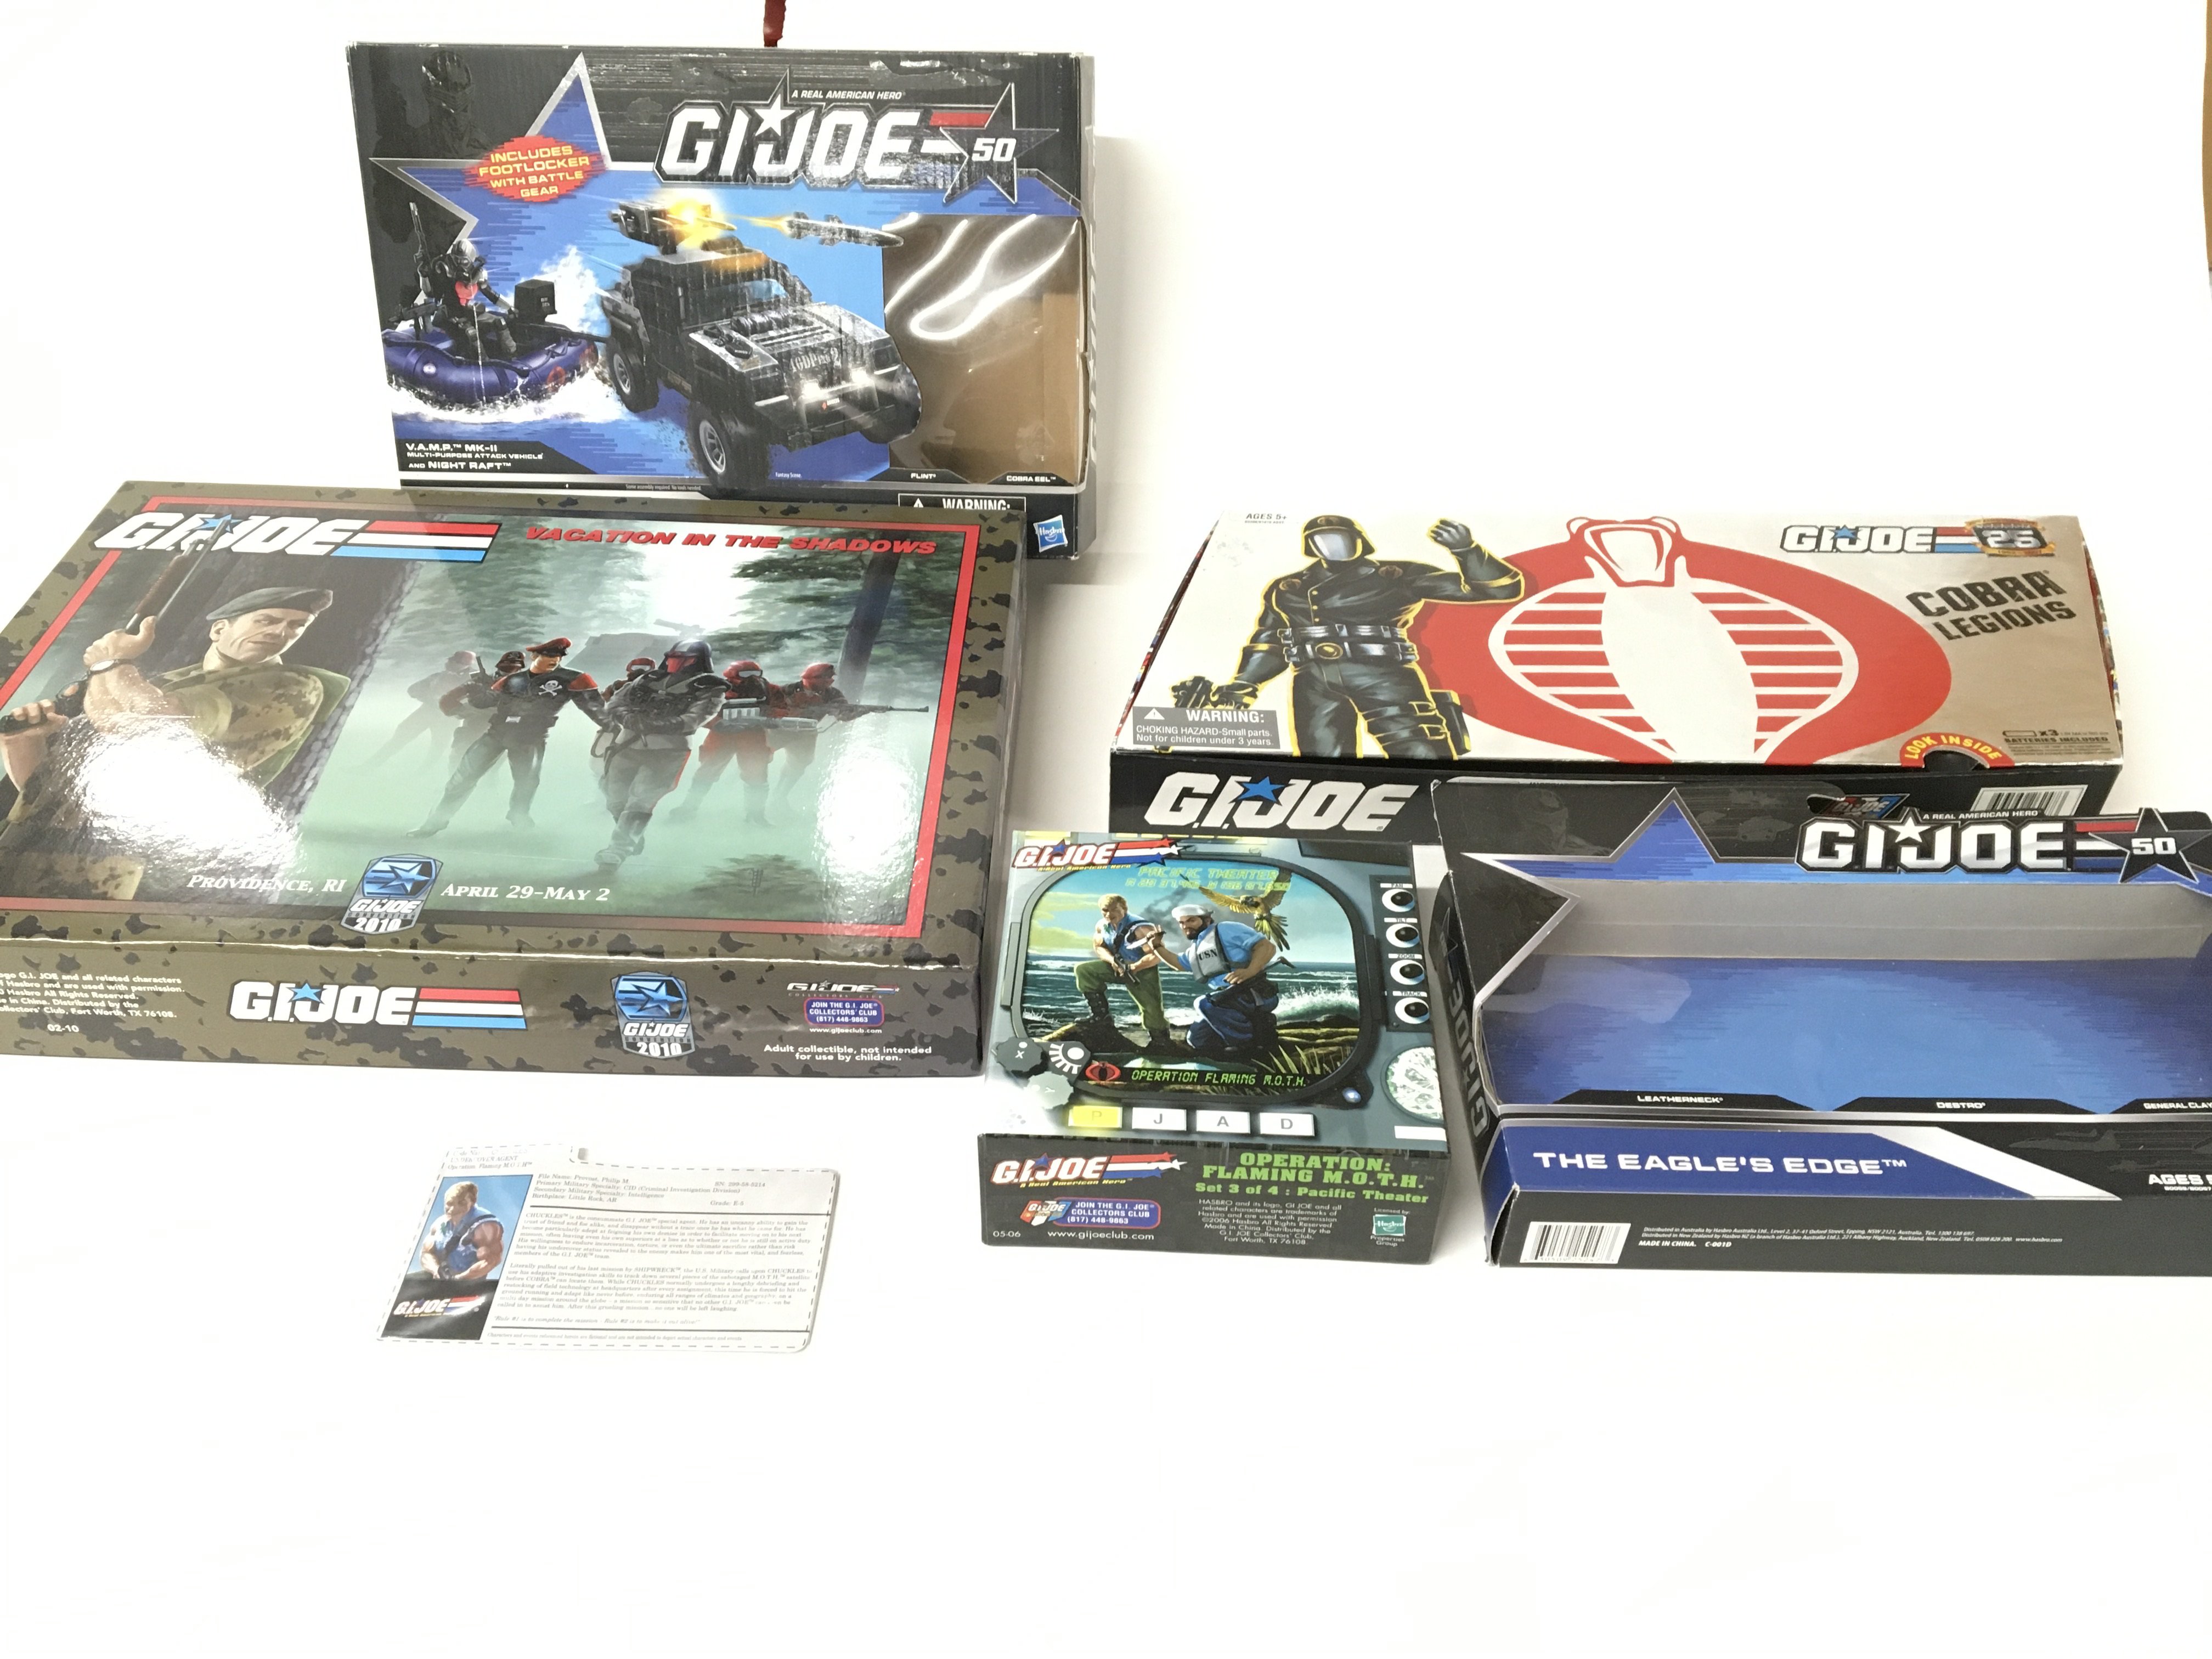 A collection of various empty G I Joe boxes.